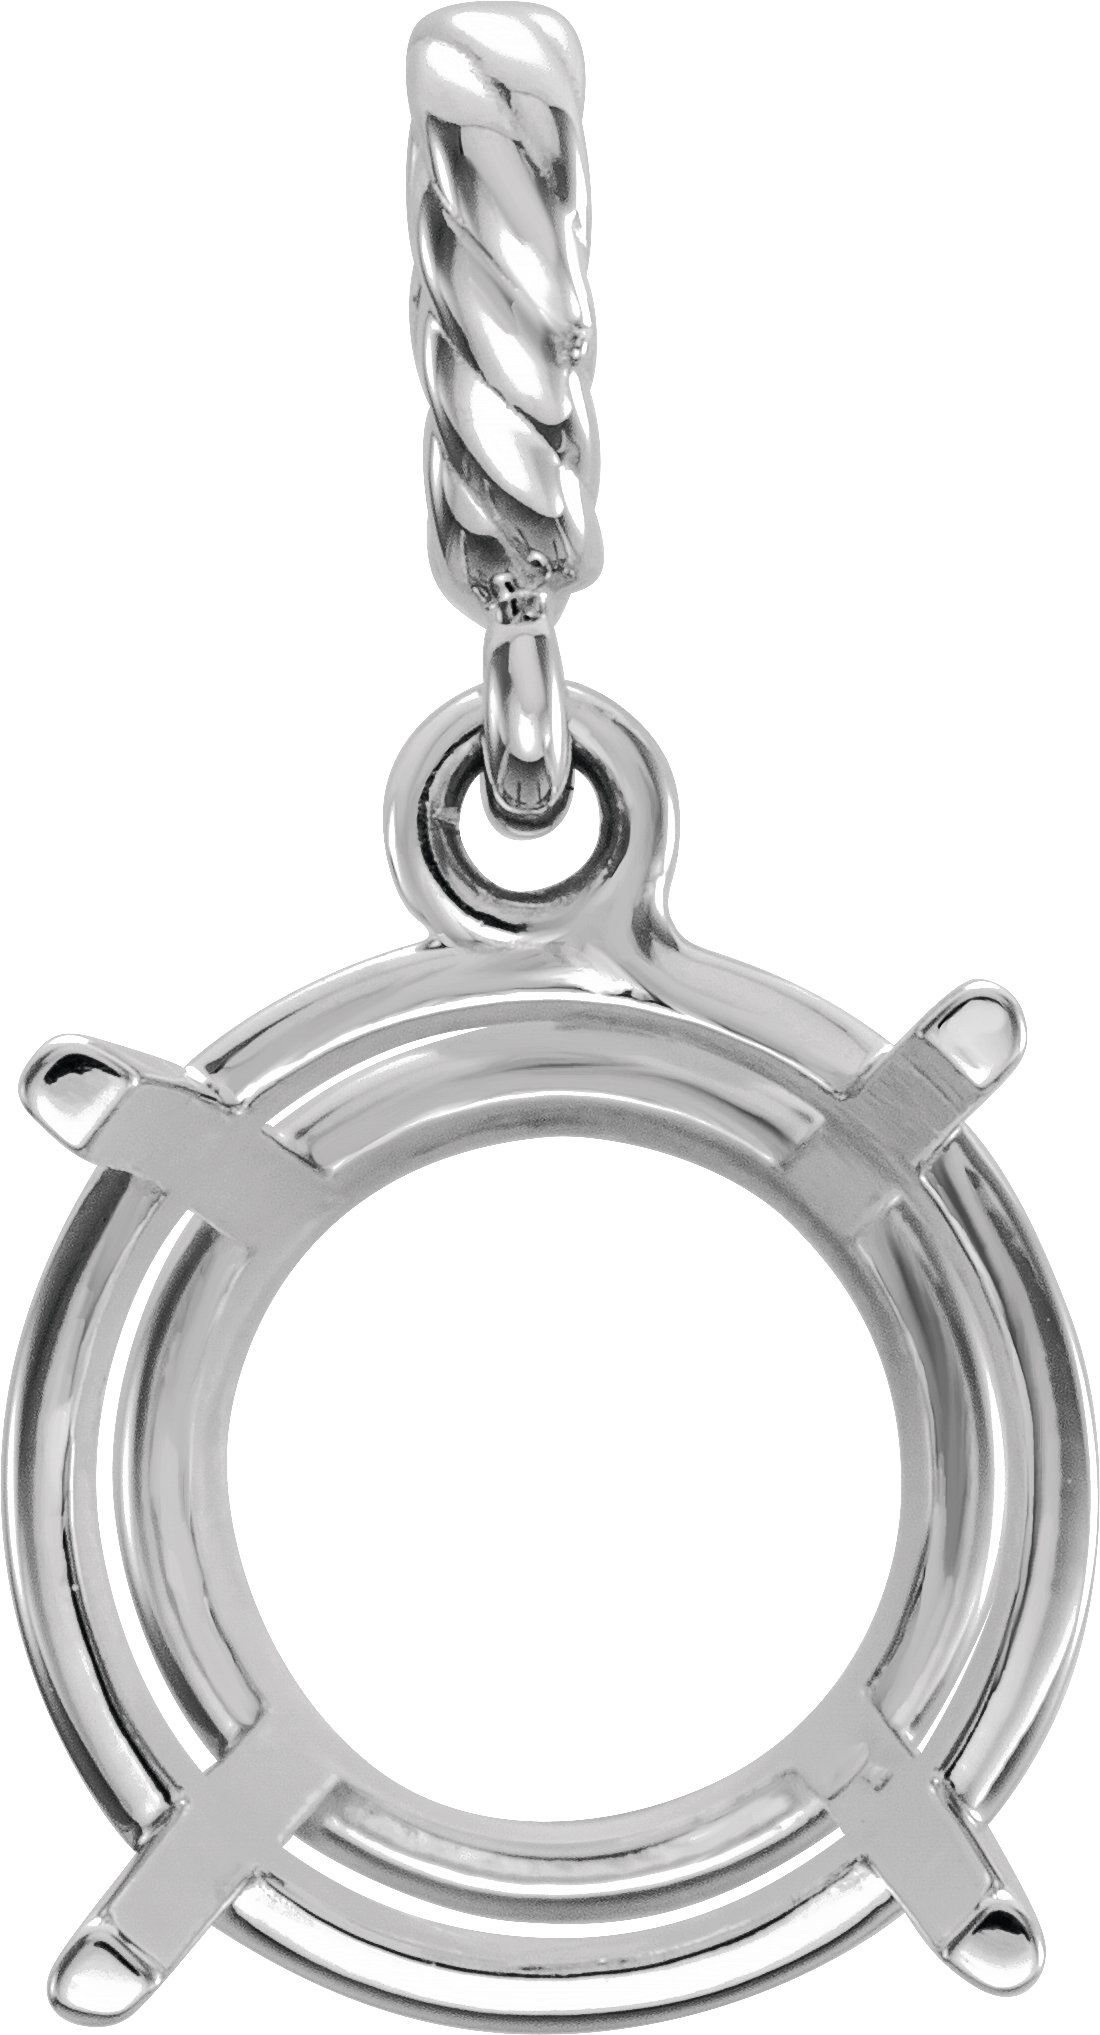 652182 / Sterling Silver / 5 Mm / Polished / Round 4-Prong Wire Basket Rope Pendant Mounting